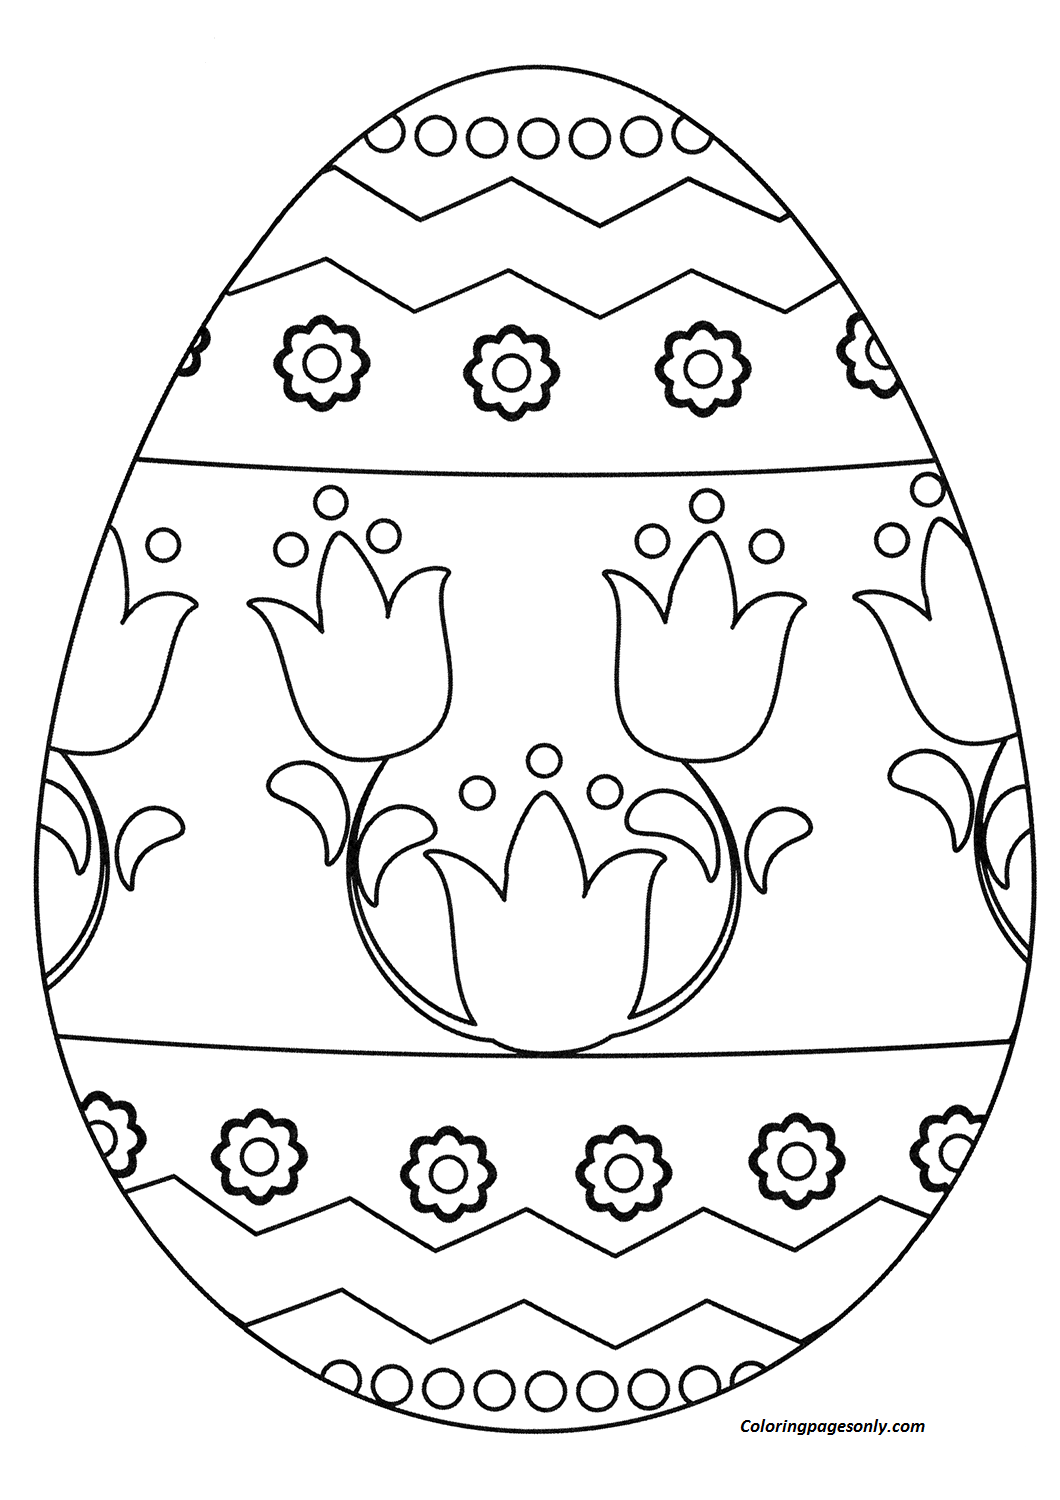 Easter Egg coloring page Coloring Page - Free Coloring Pages Online